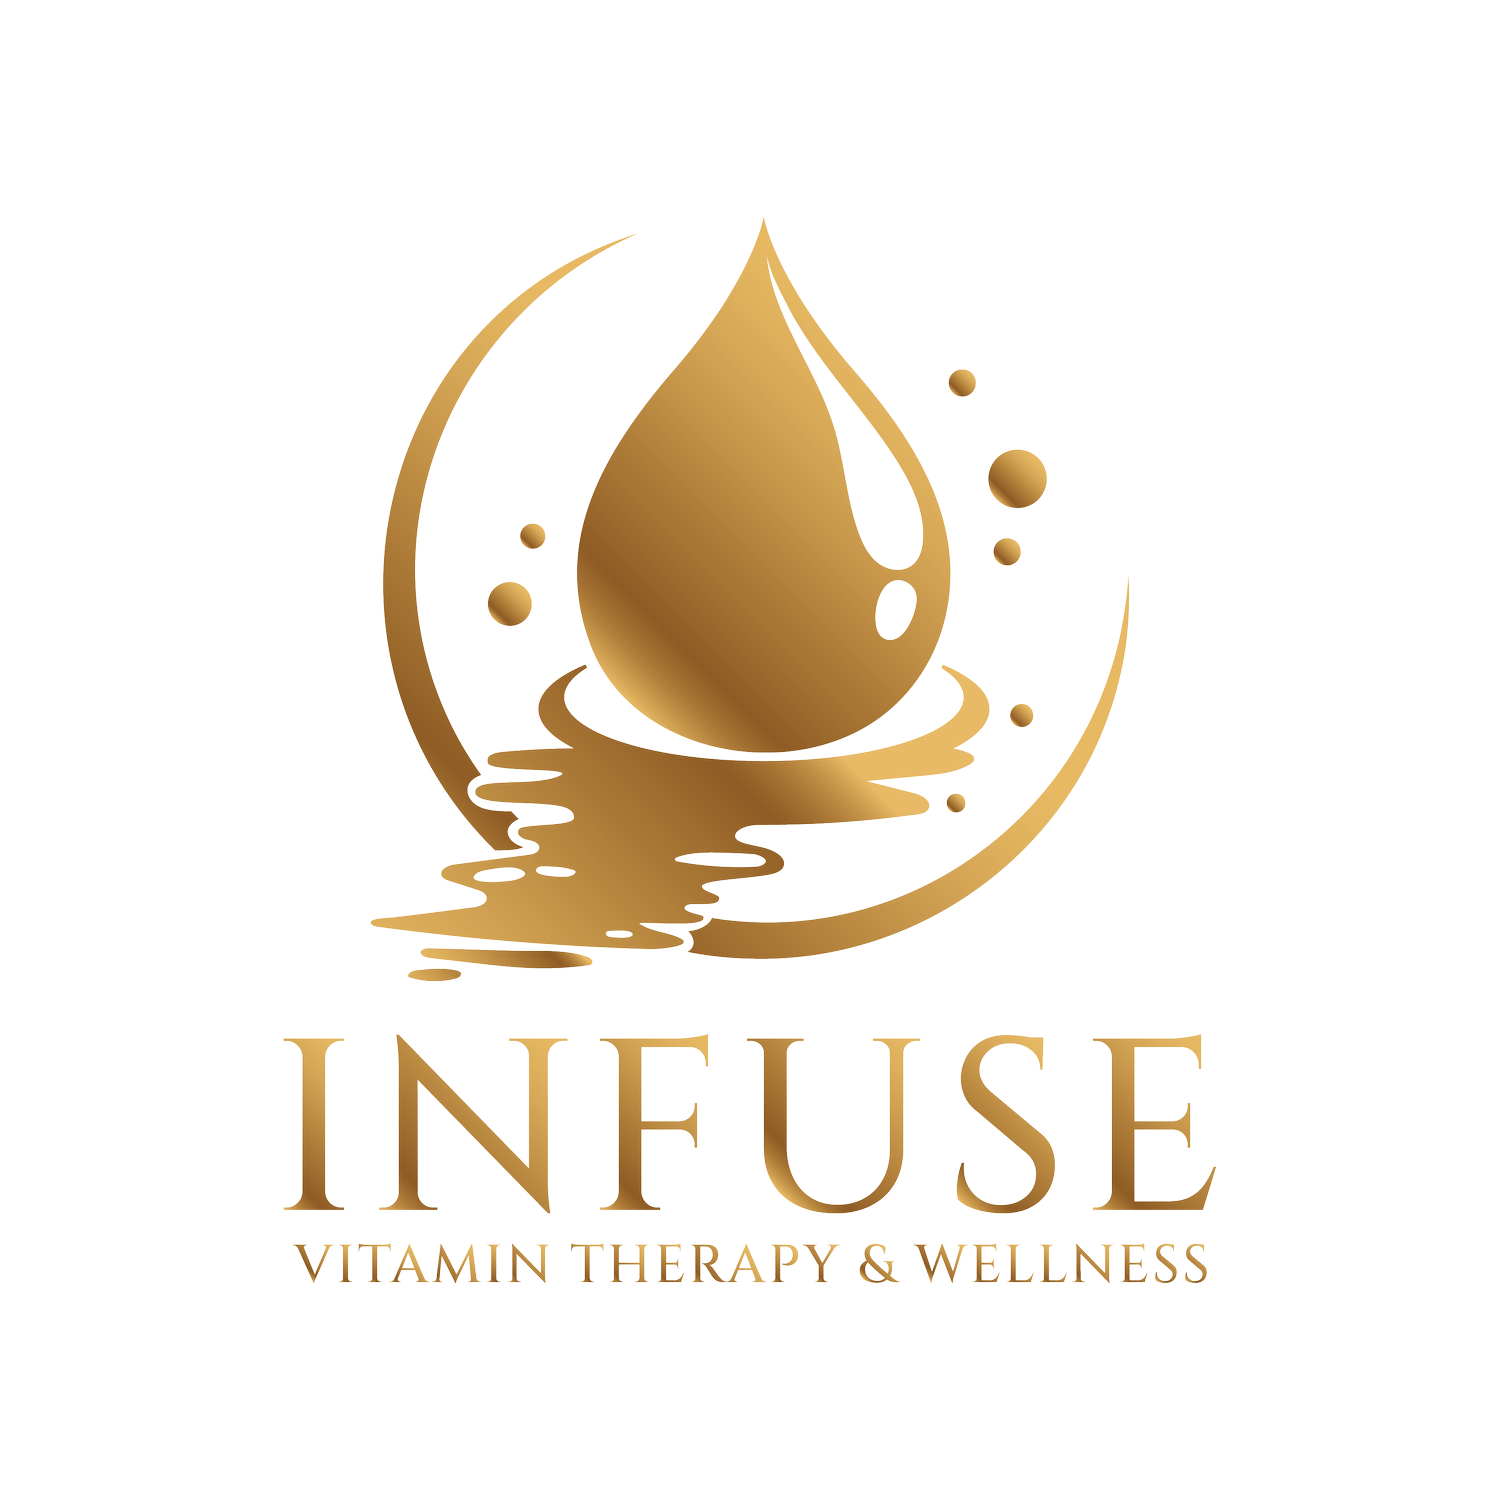 Infuse